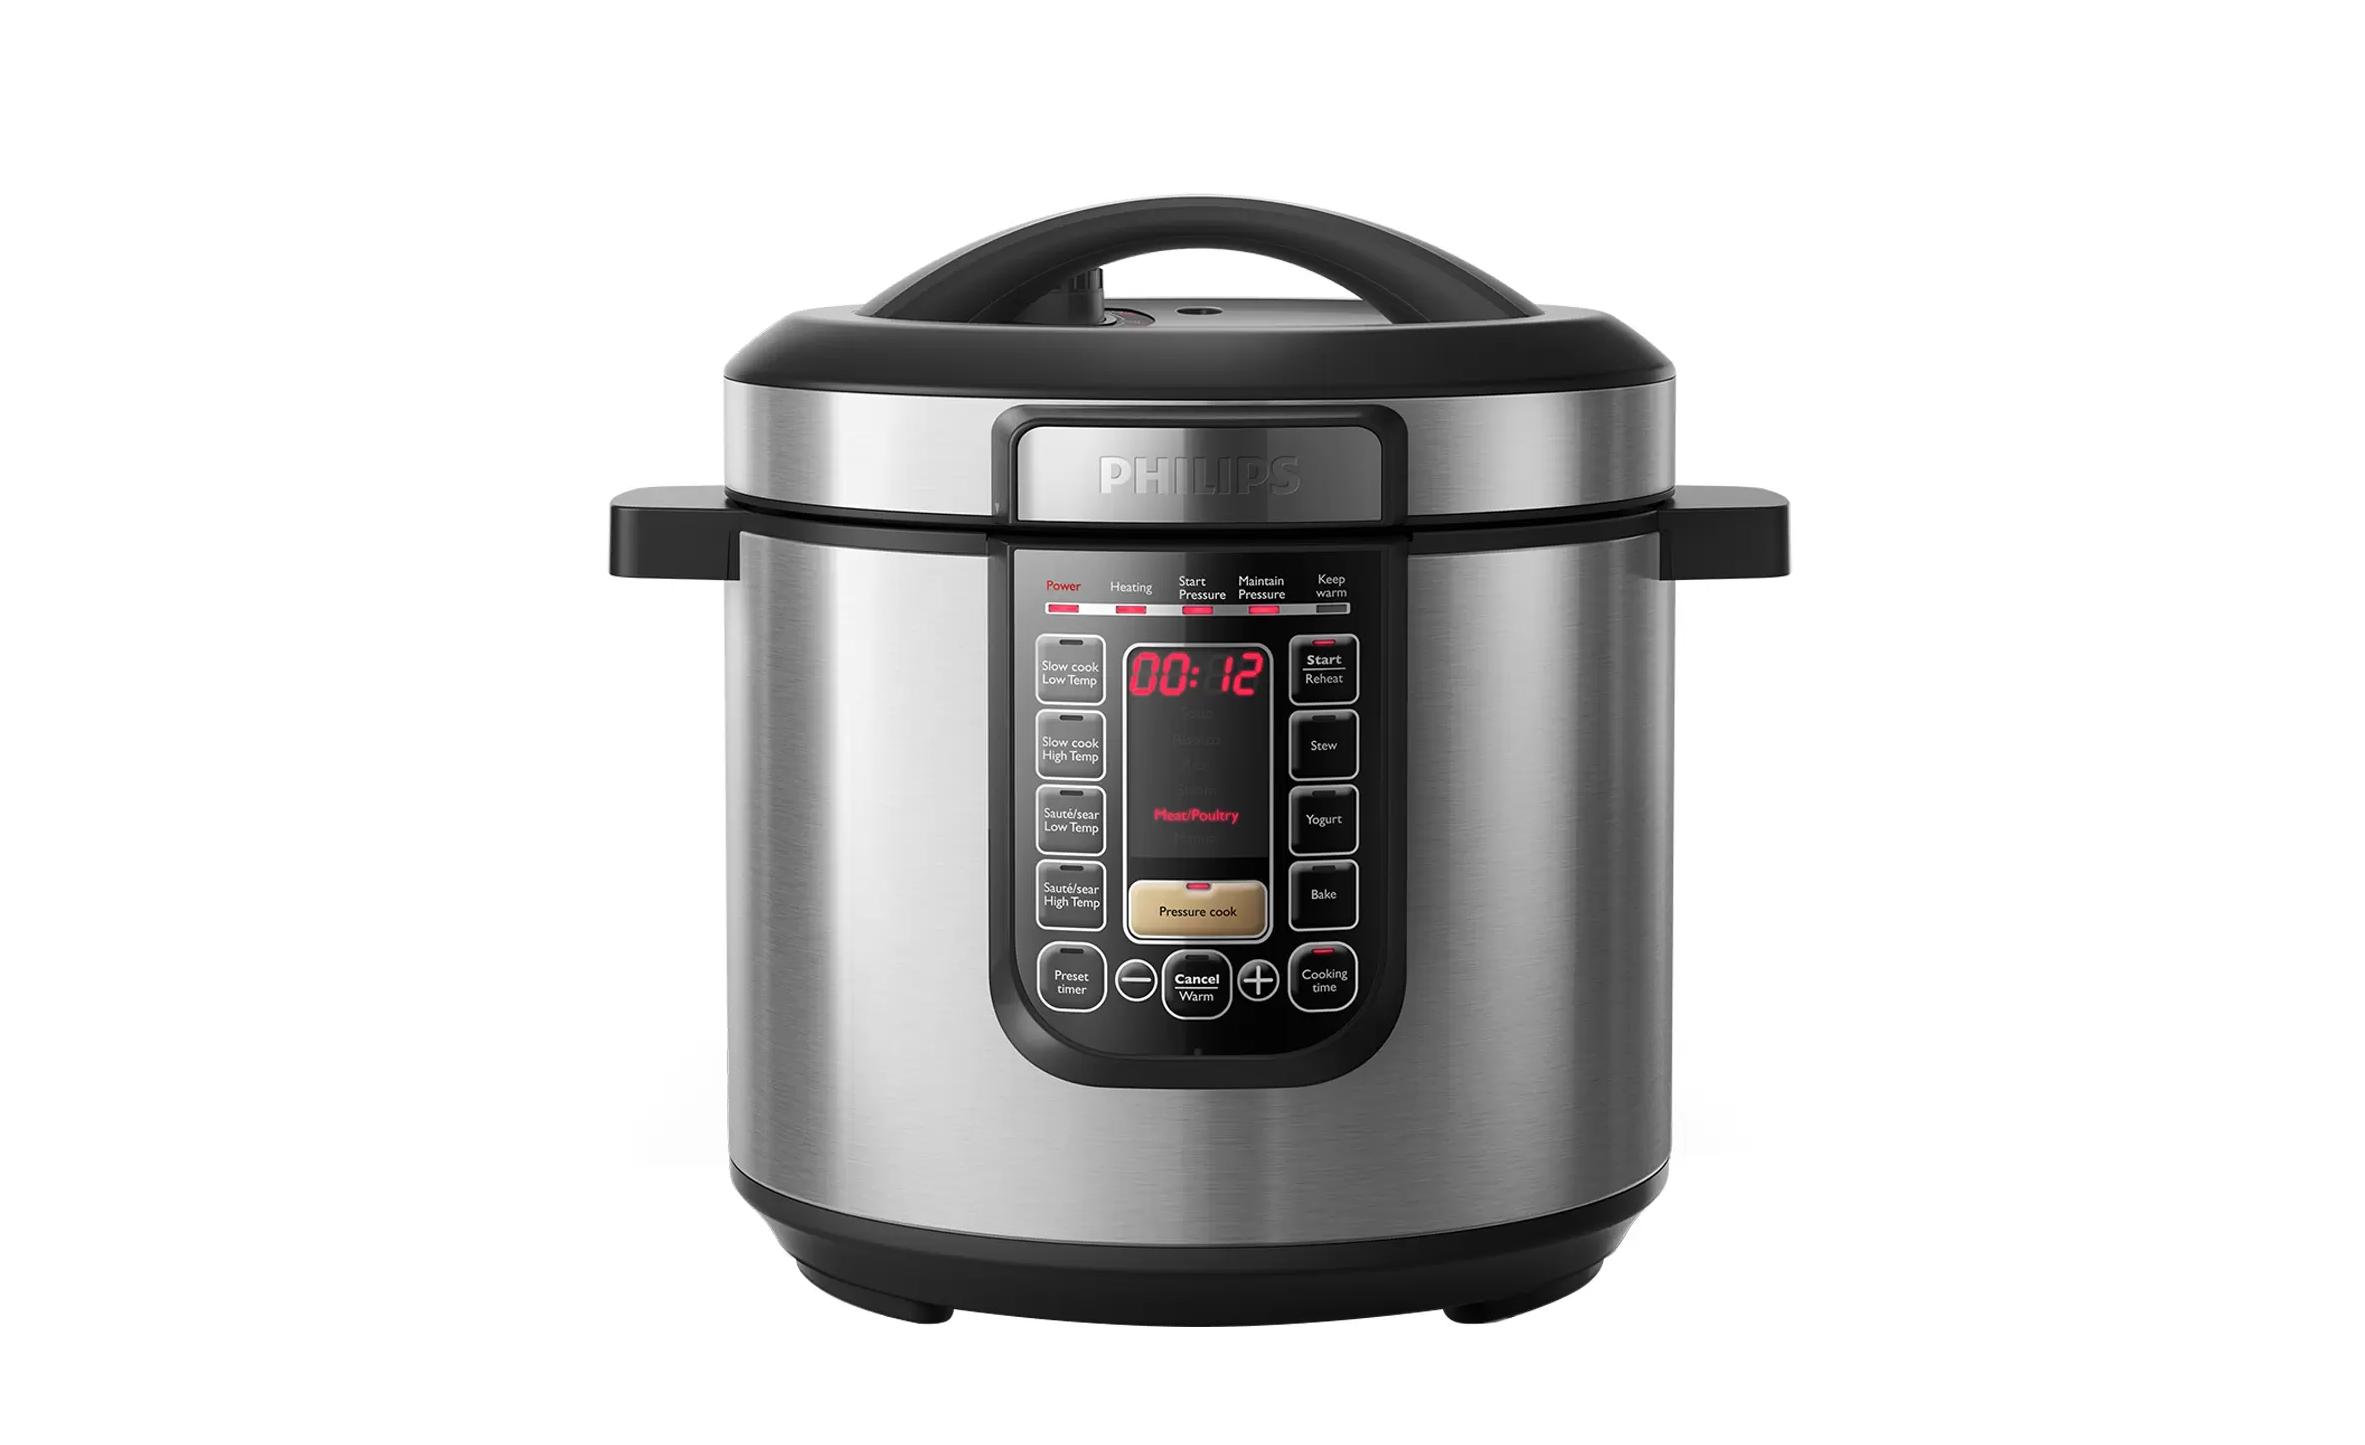 Philips All In One Cooker + Stainless Steel Bowl now $209.99 delivered for Costco members